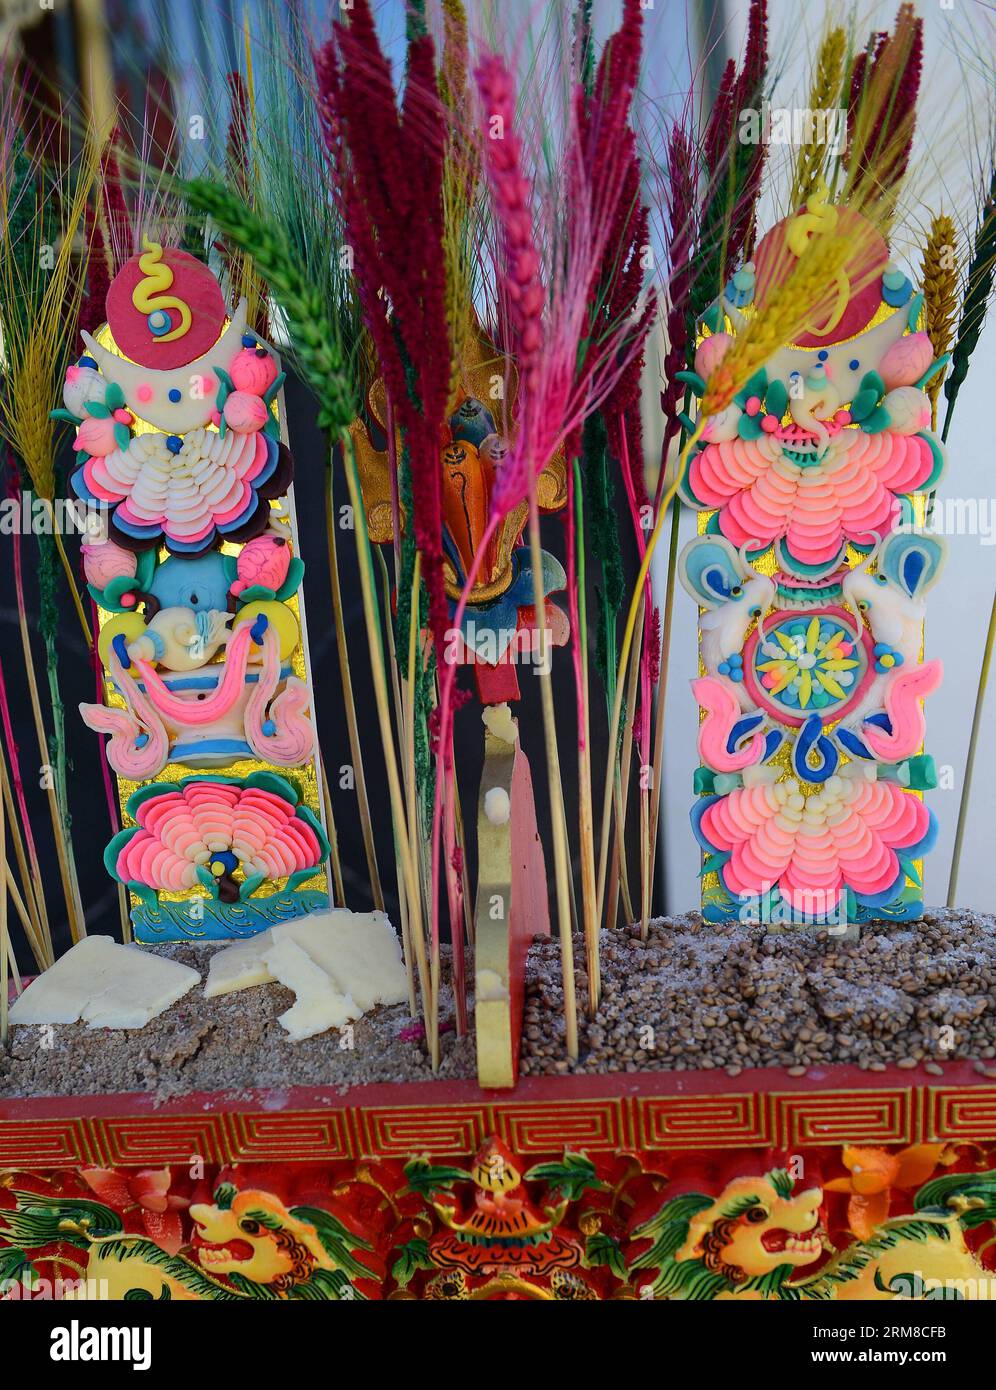 LHASA,  2014 - Photo taken on March 27, 2014 shows butter sculptures in Kangxung Township of Rinbung County in Shigatse, southwest China s Tibet Autonomous Region. There are about 100 butter sculpture craftsmen in Kangxung because of the growing need in market. Butter Sculpture is an ancient and unique genre of art in Tibet whitch was listed as a national intangible cultural heritage by the State Council in 2006. (Xinhua/Chogo) (zkr) CHINA-SHIGATSE-BUTTER SCULPTURE(CN) PUBLICATIONxNOTxINxCHN   Lhasa 2014 Photo Taken ON March 27 2014 Shows Butter Sculptures in  Township of Rinbung County in Shi Stock Photo